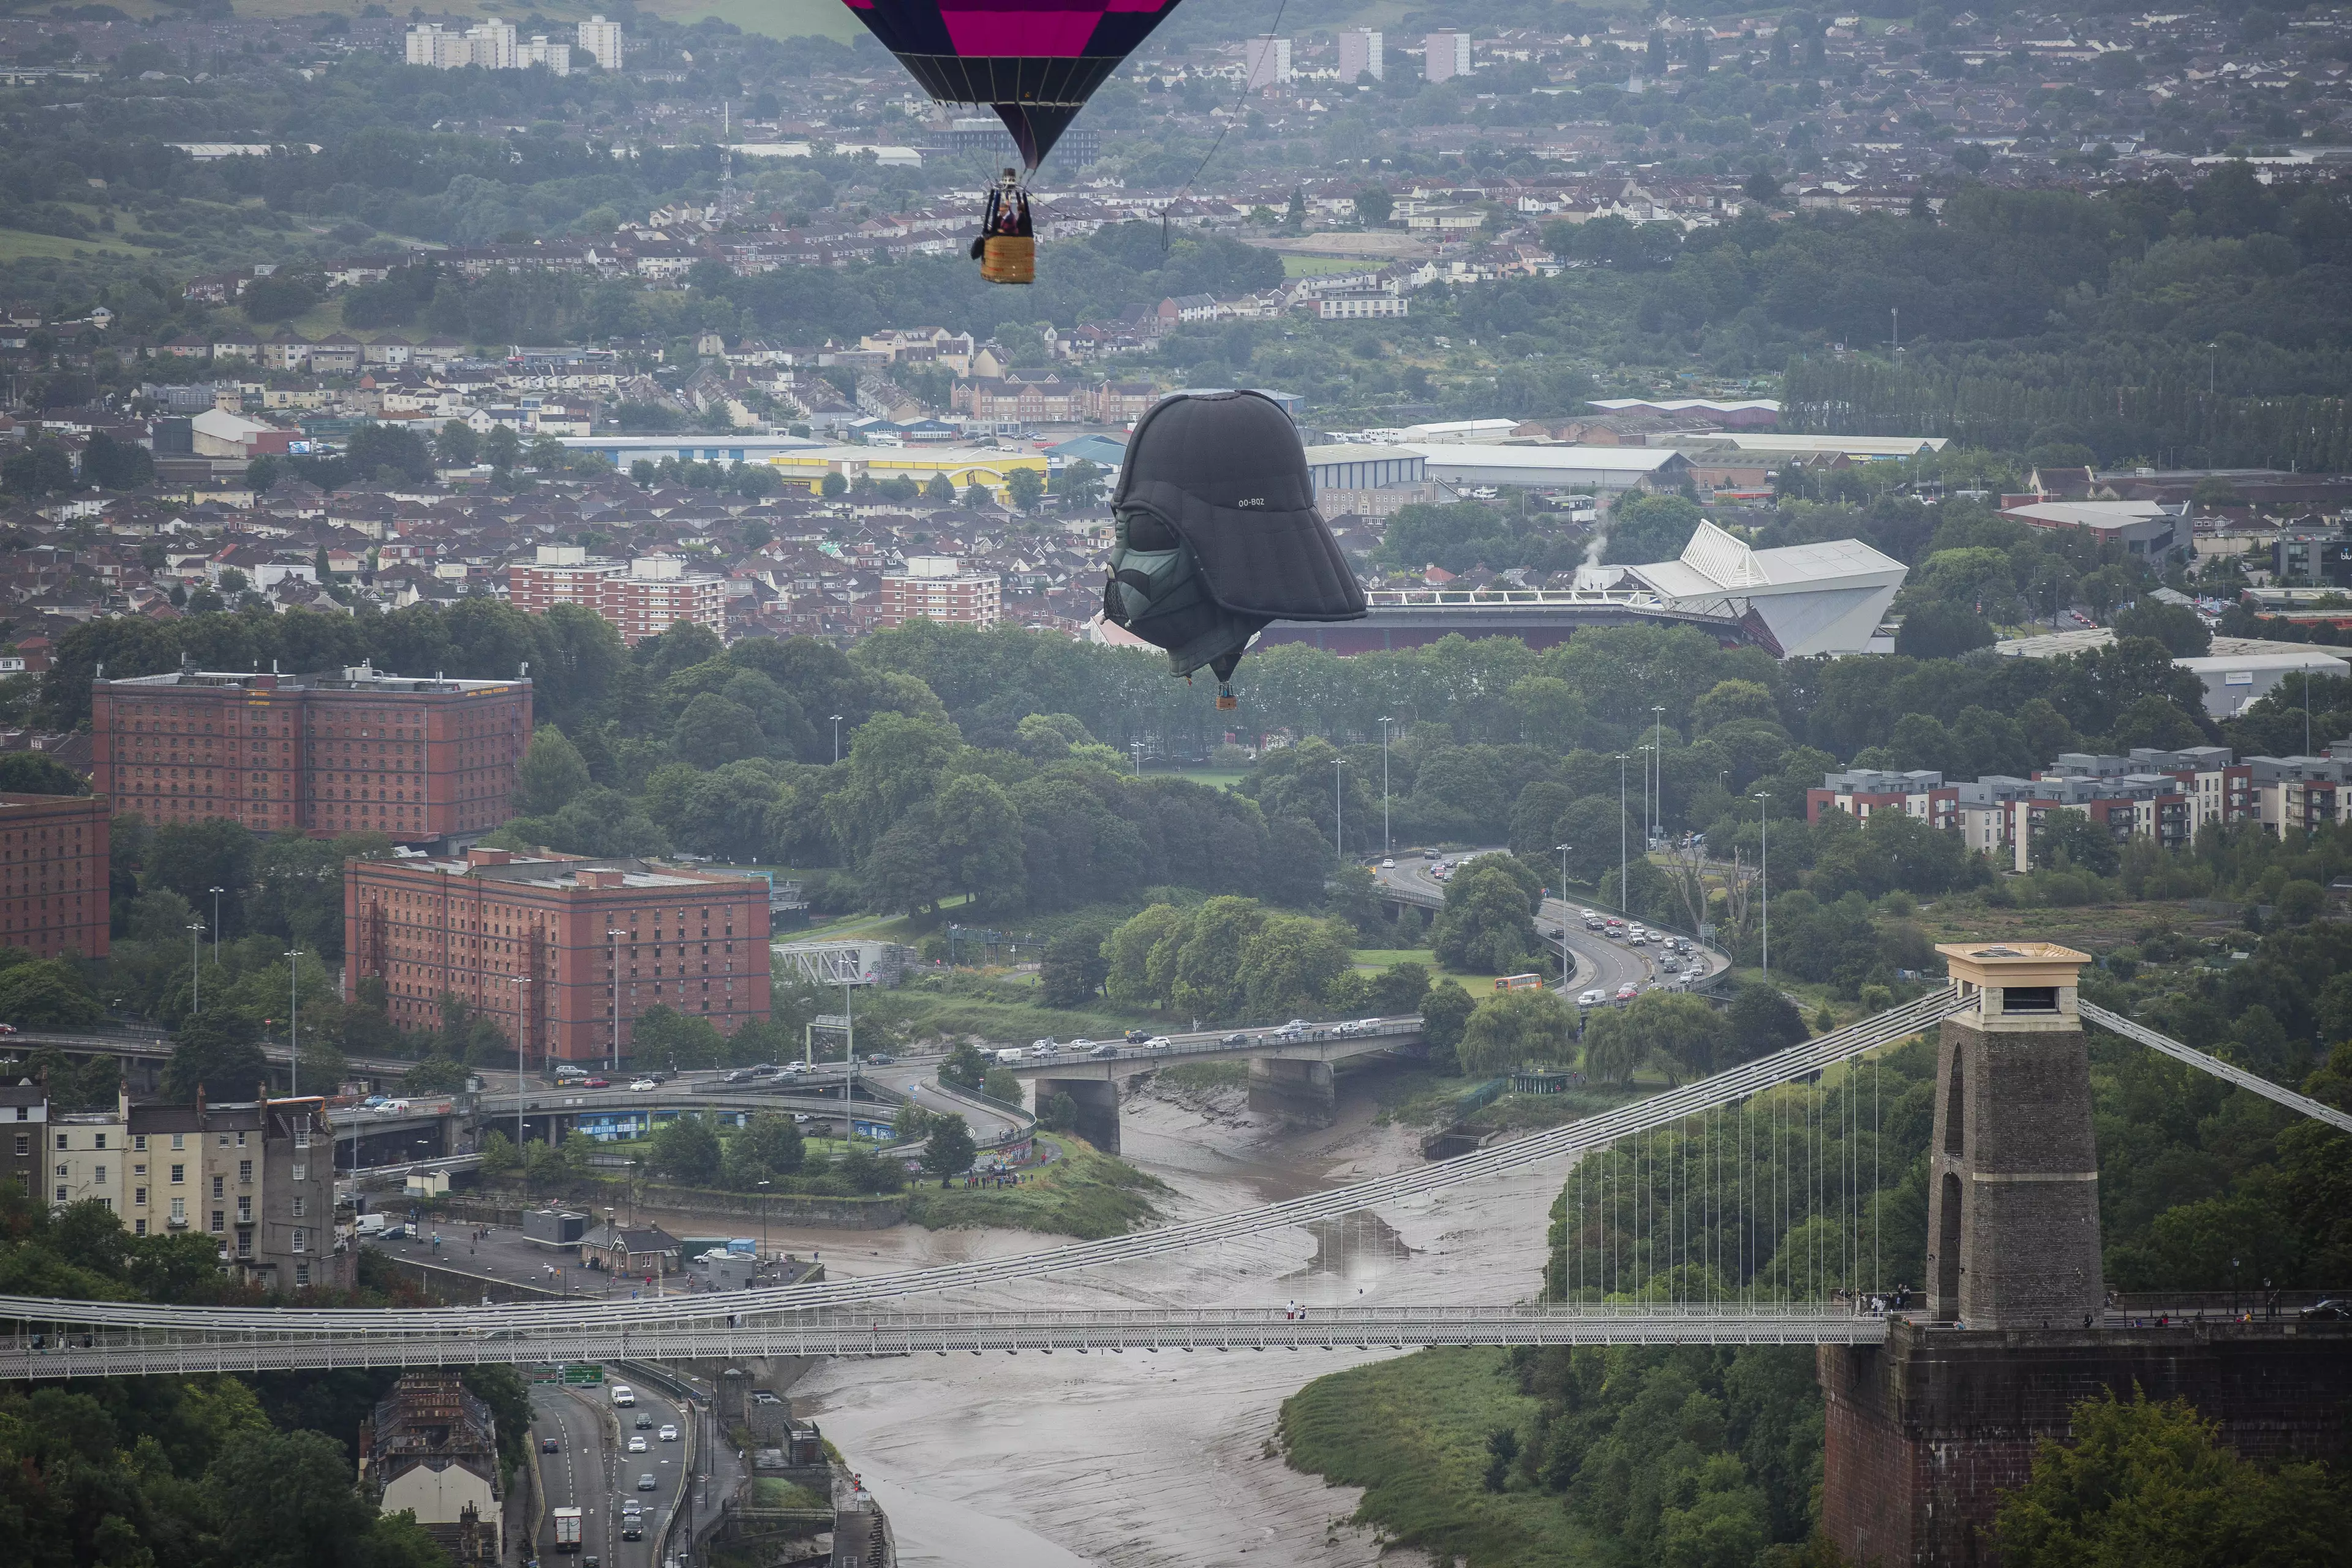 The head was spotted floating across the Bristol skyline.